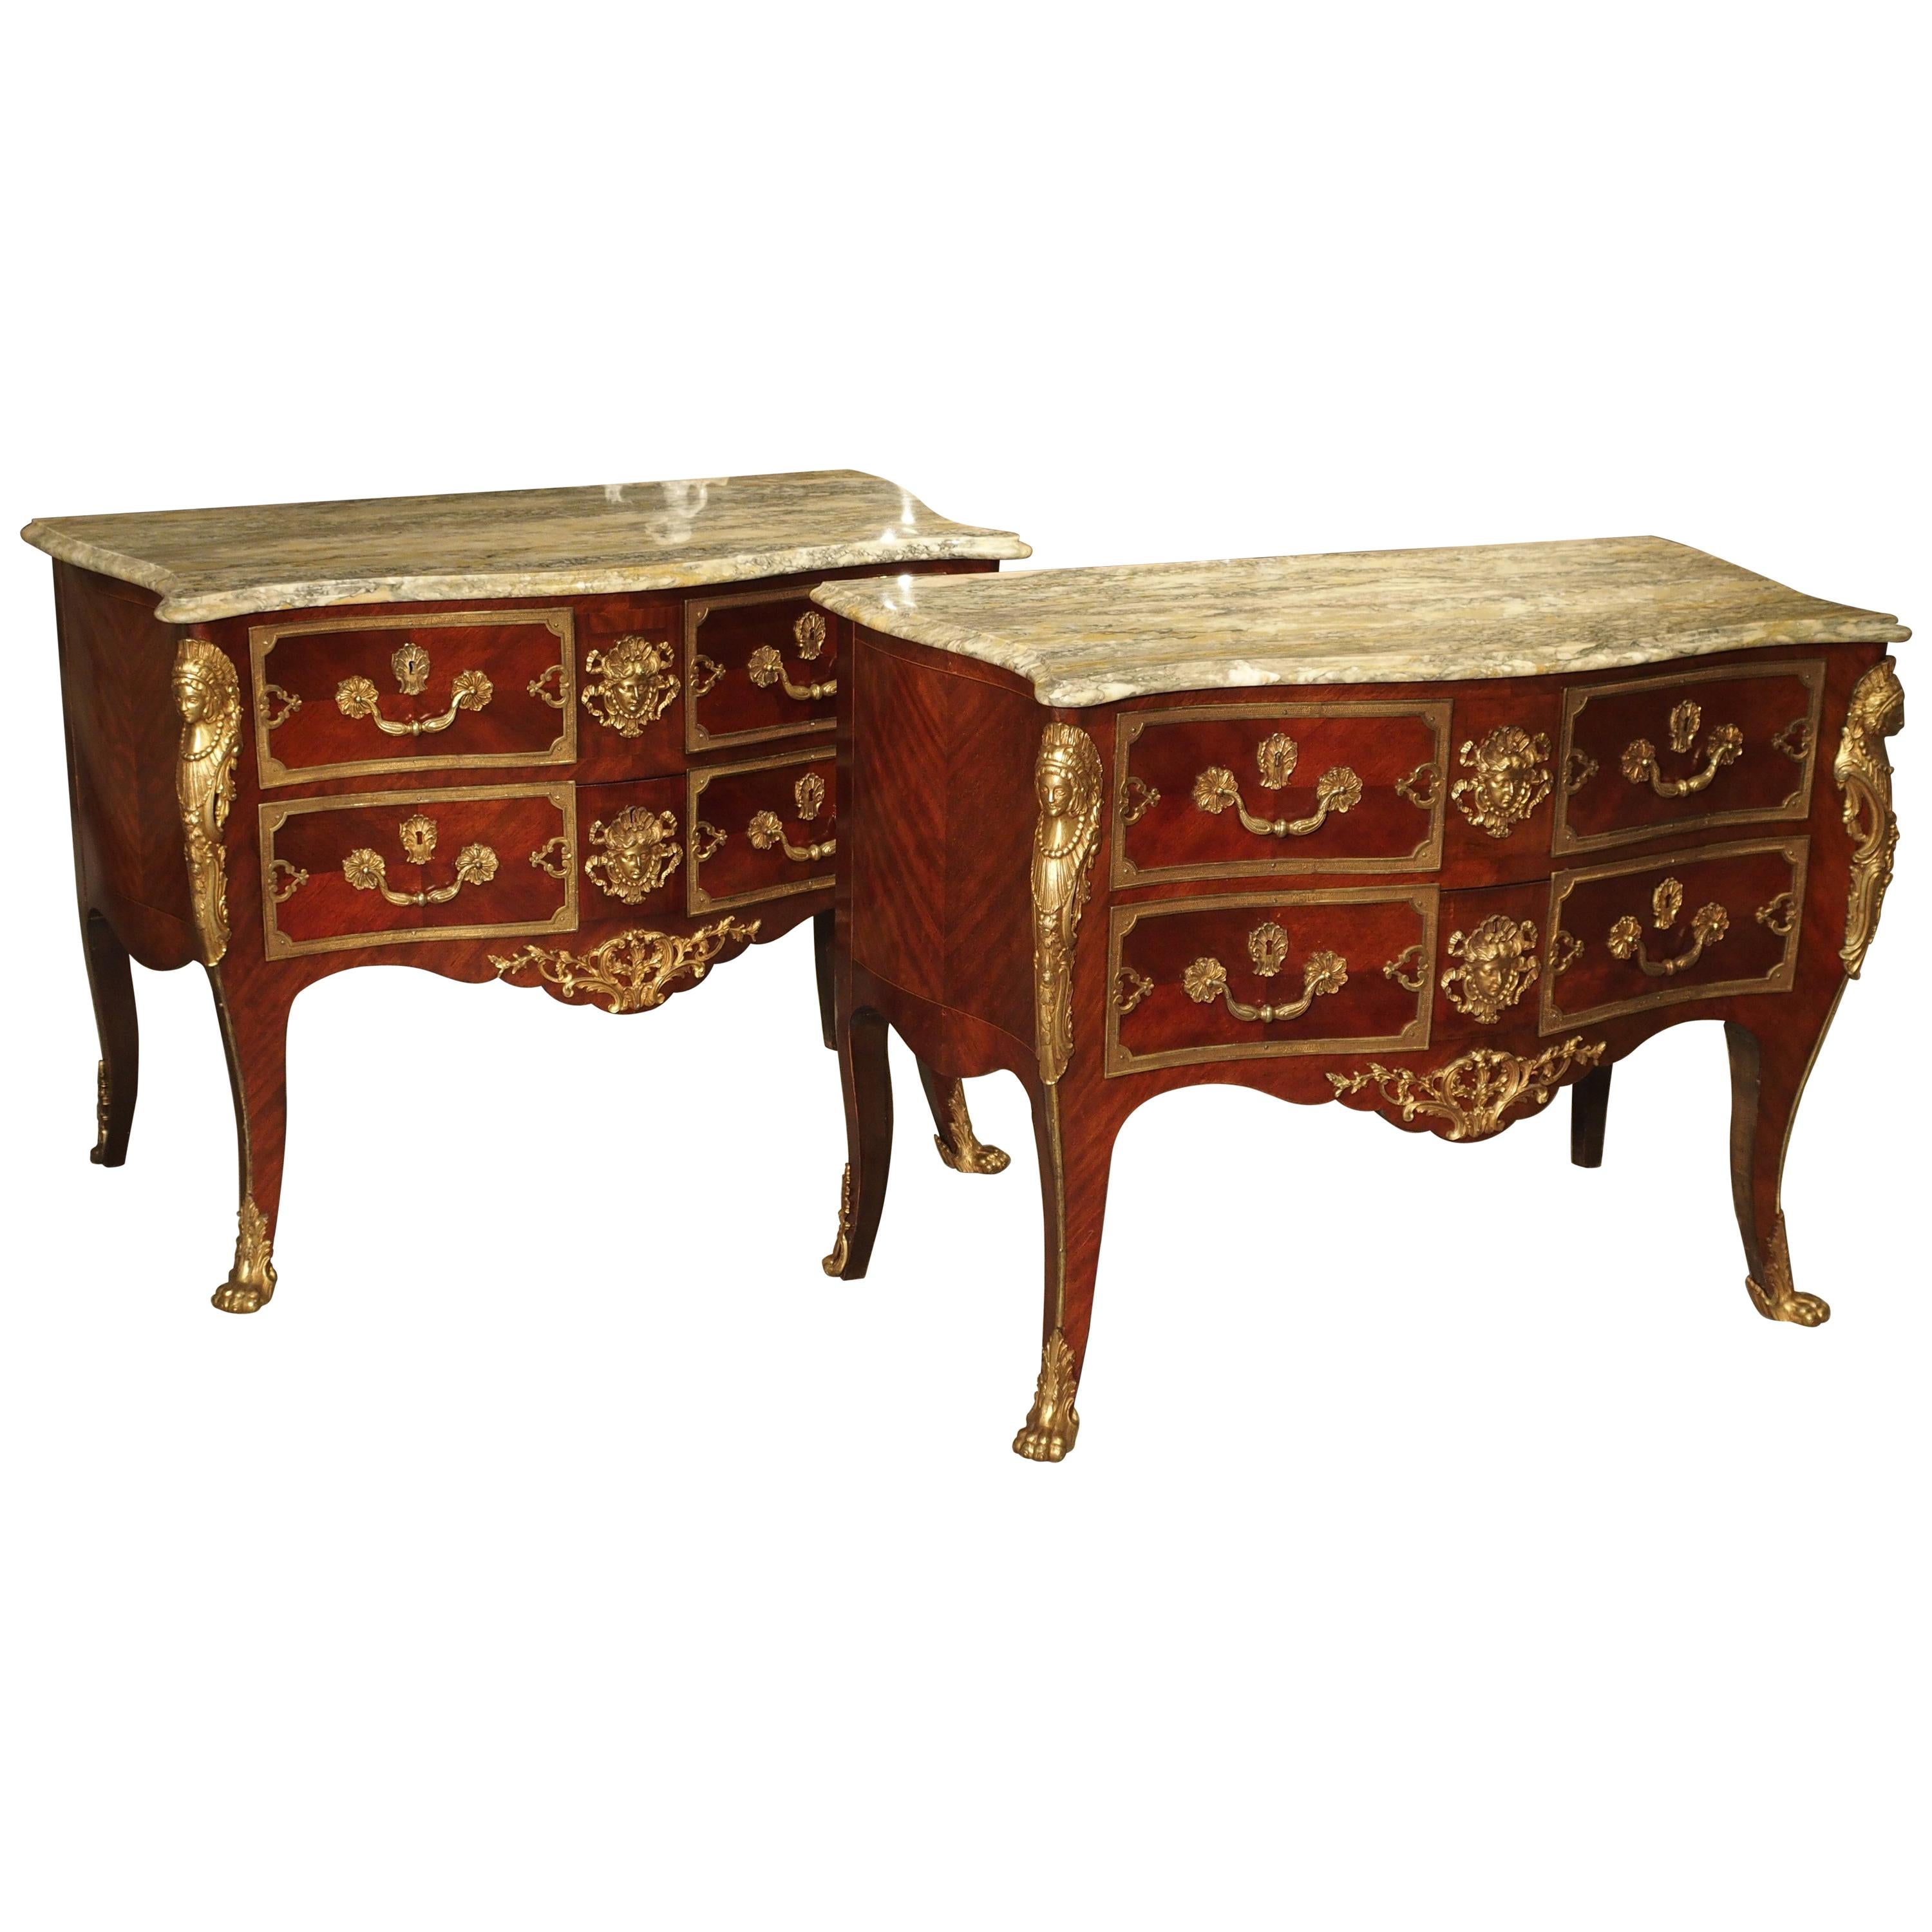 Pair of Early 1900s Mahogany and Gilt Bronze Mounted Louis XV Style Commodes